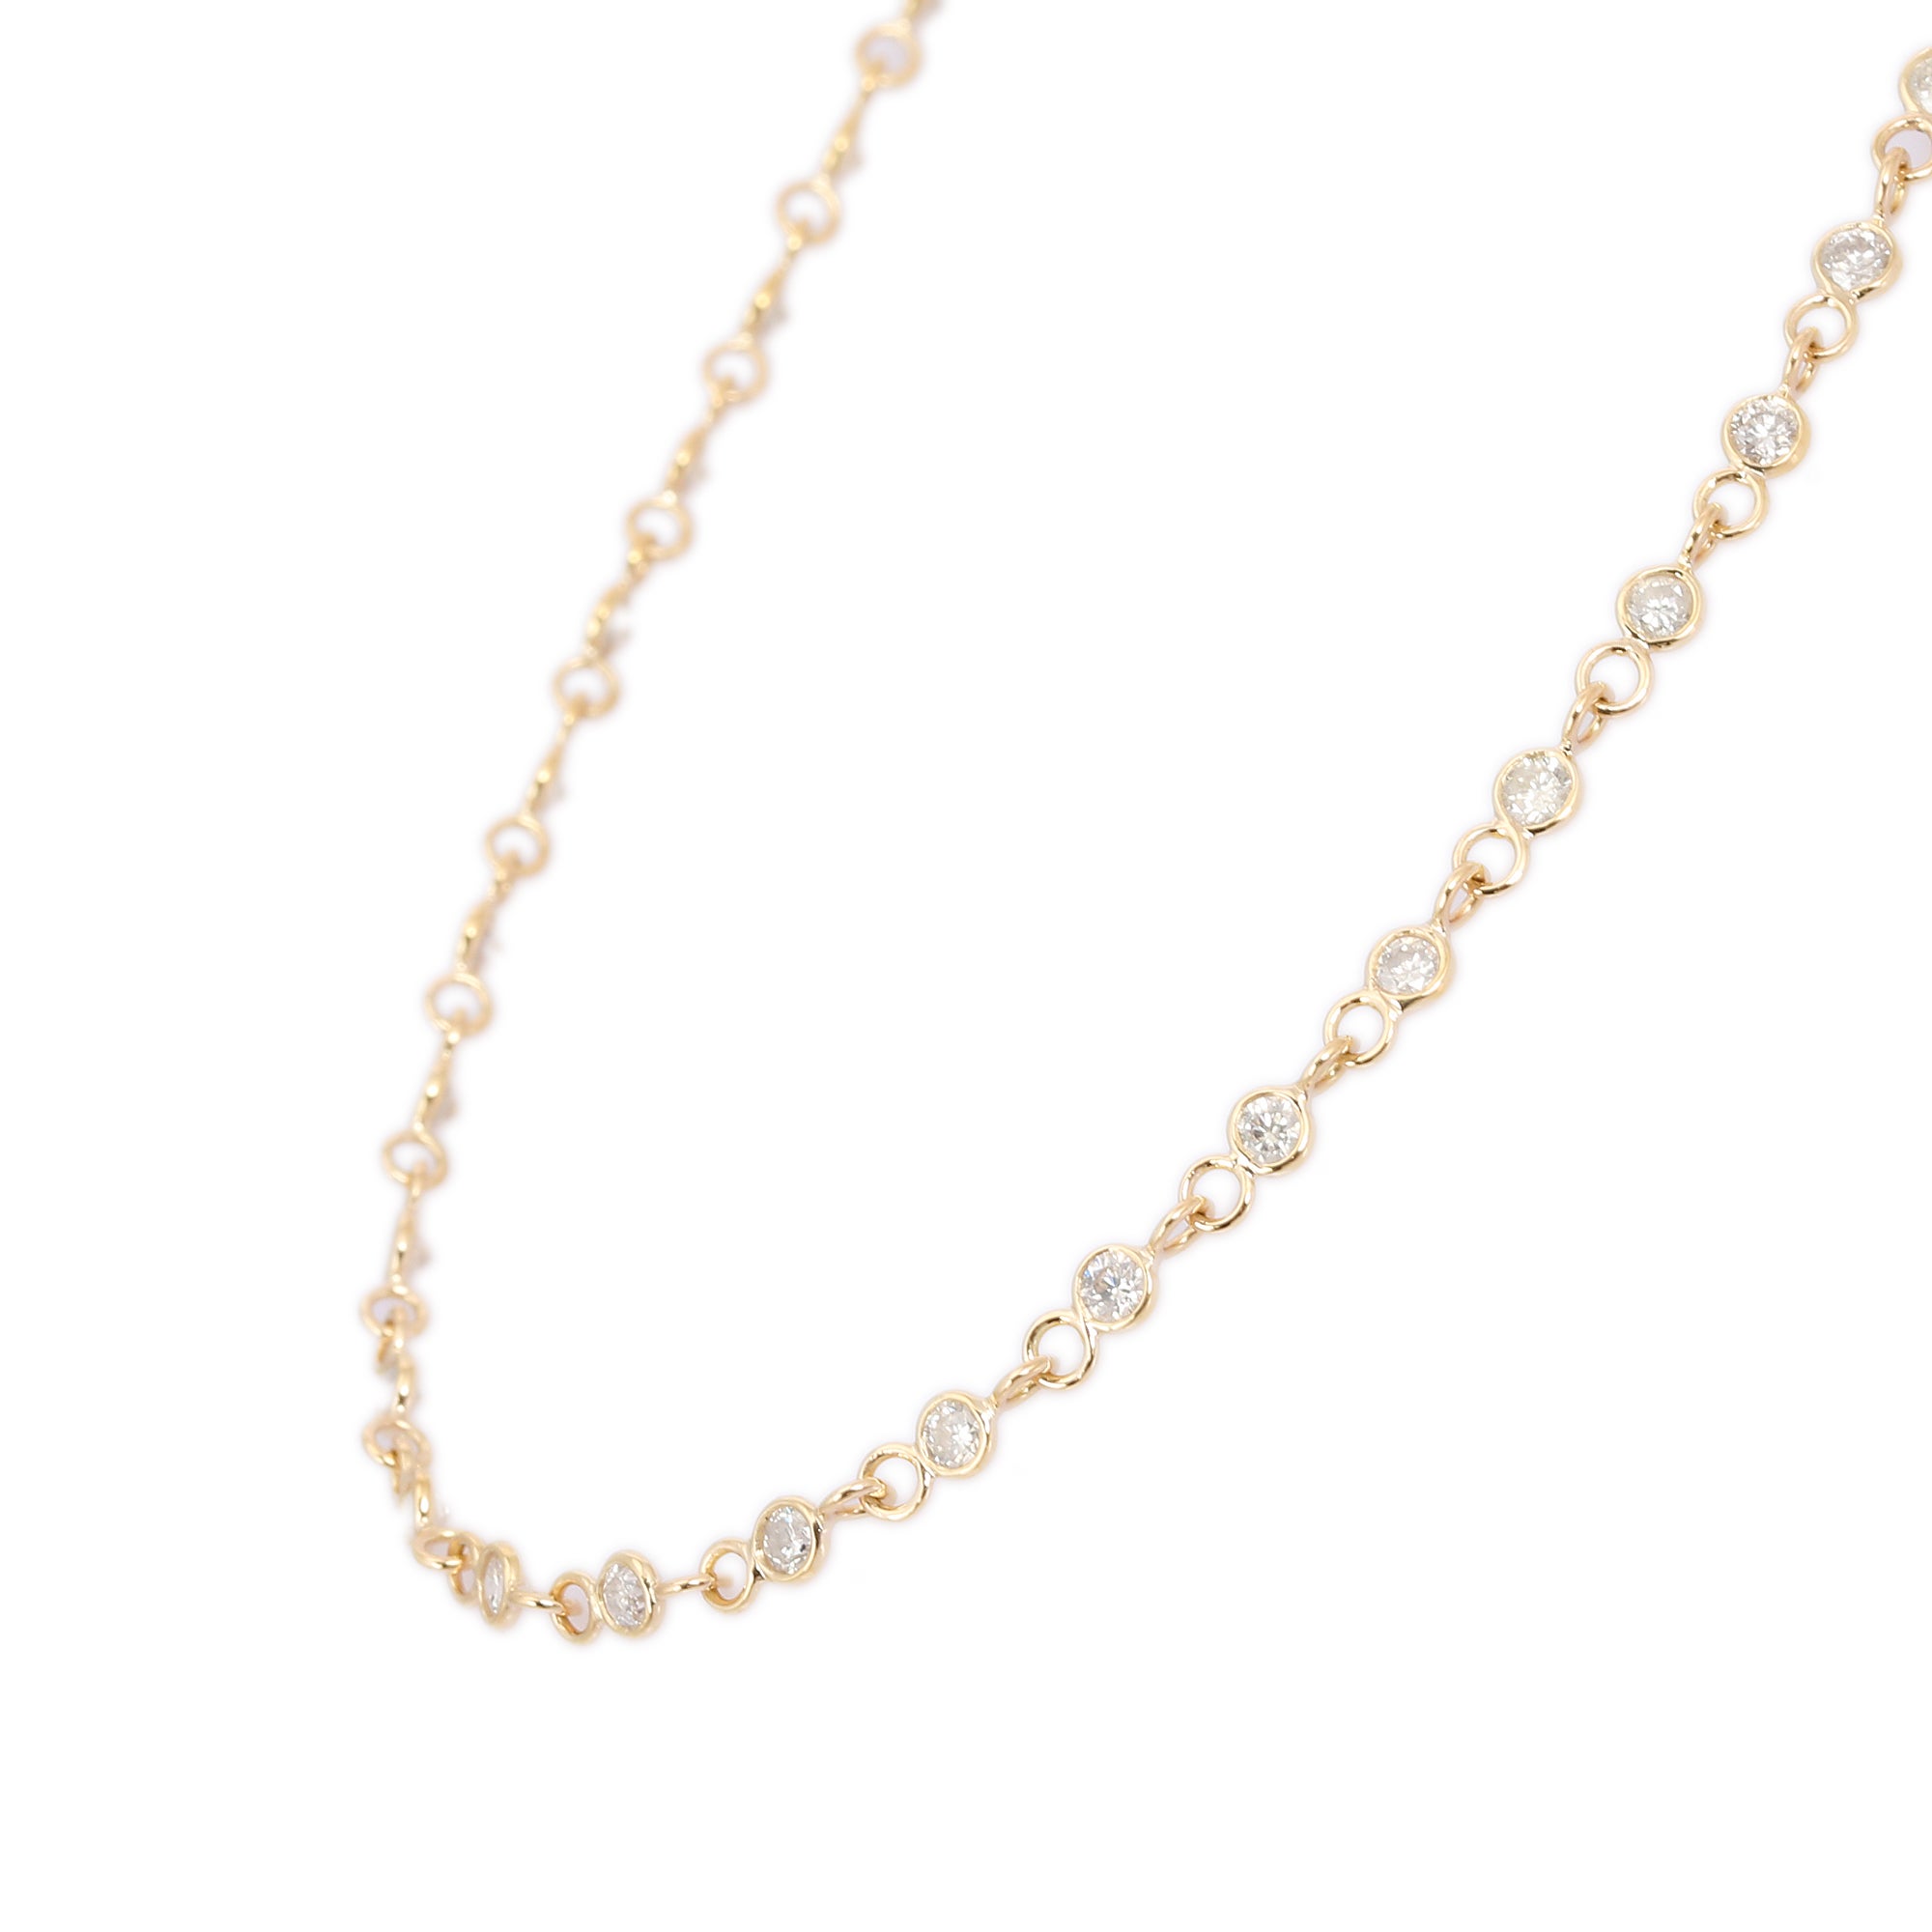 Modern Fine Diamond Long Necklace 14k Solid Yellow Gold, Christmas Gift For Women